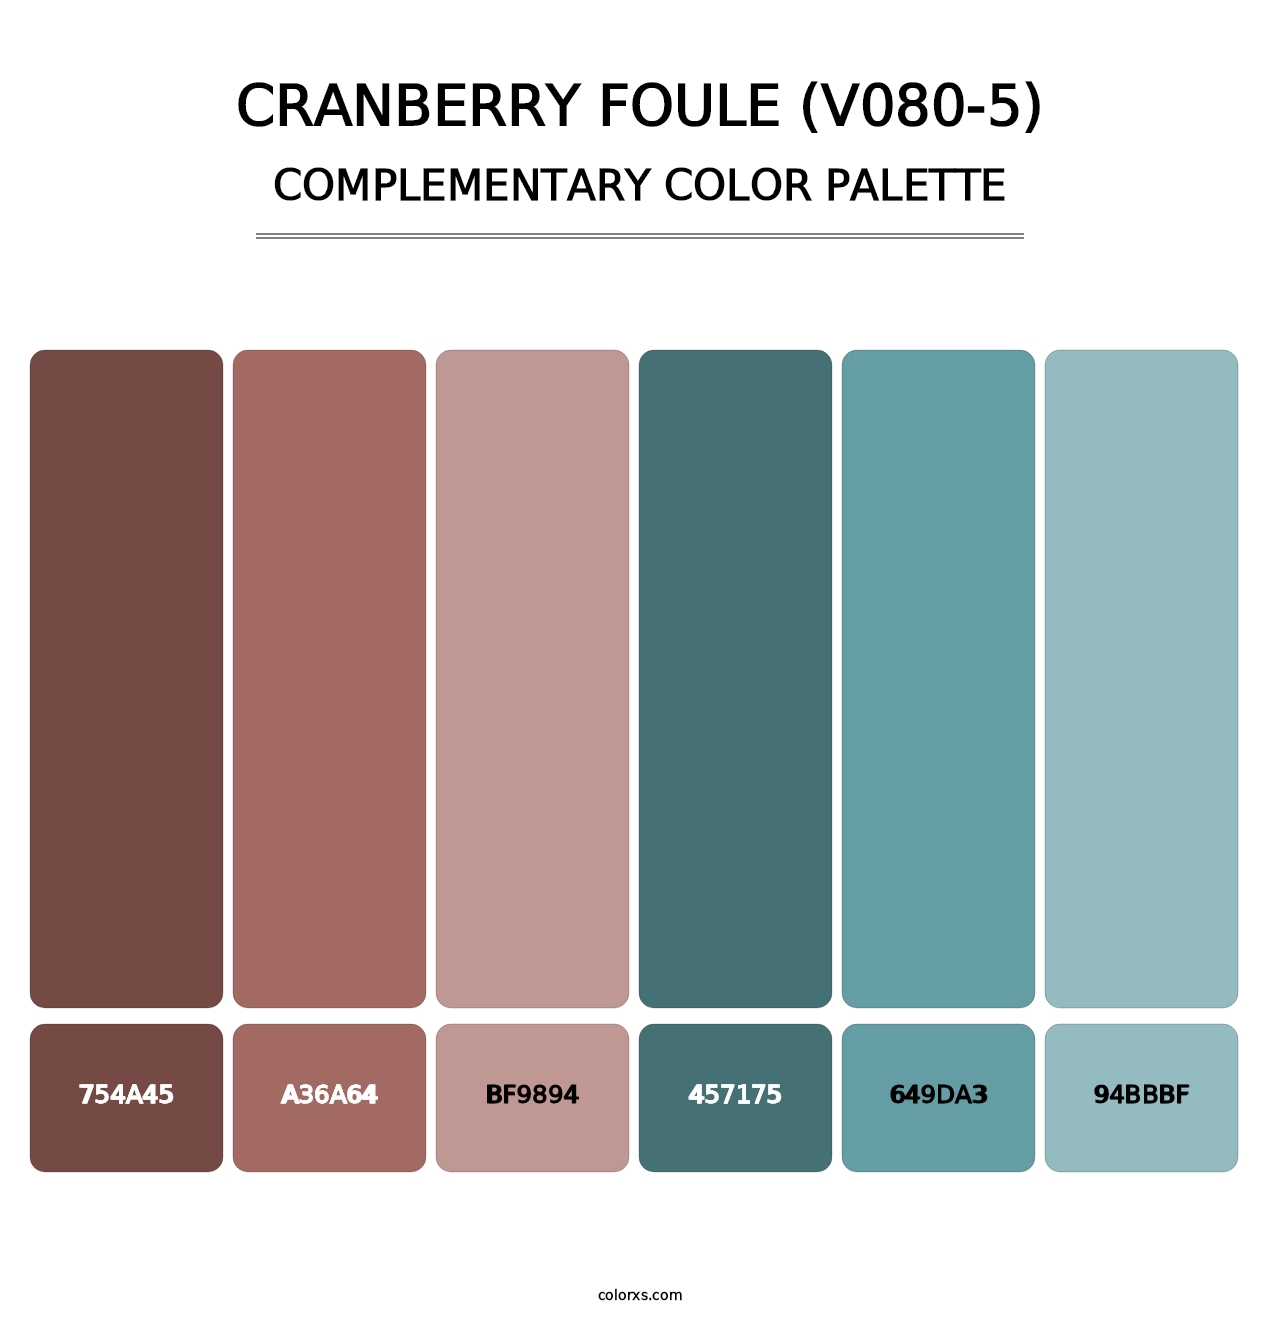 Cranberry Foule (V080-5) - Complementary Color Palette